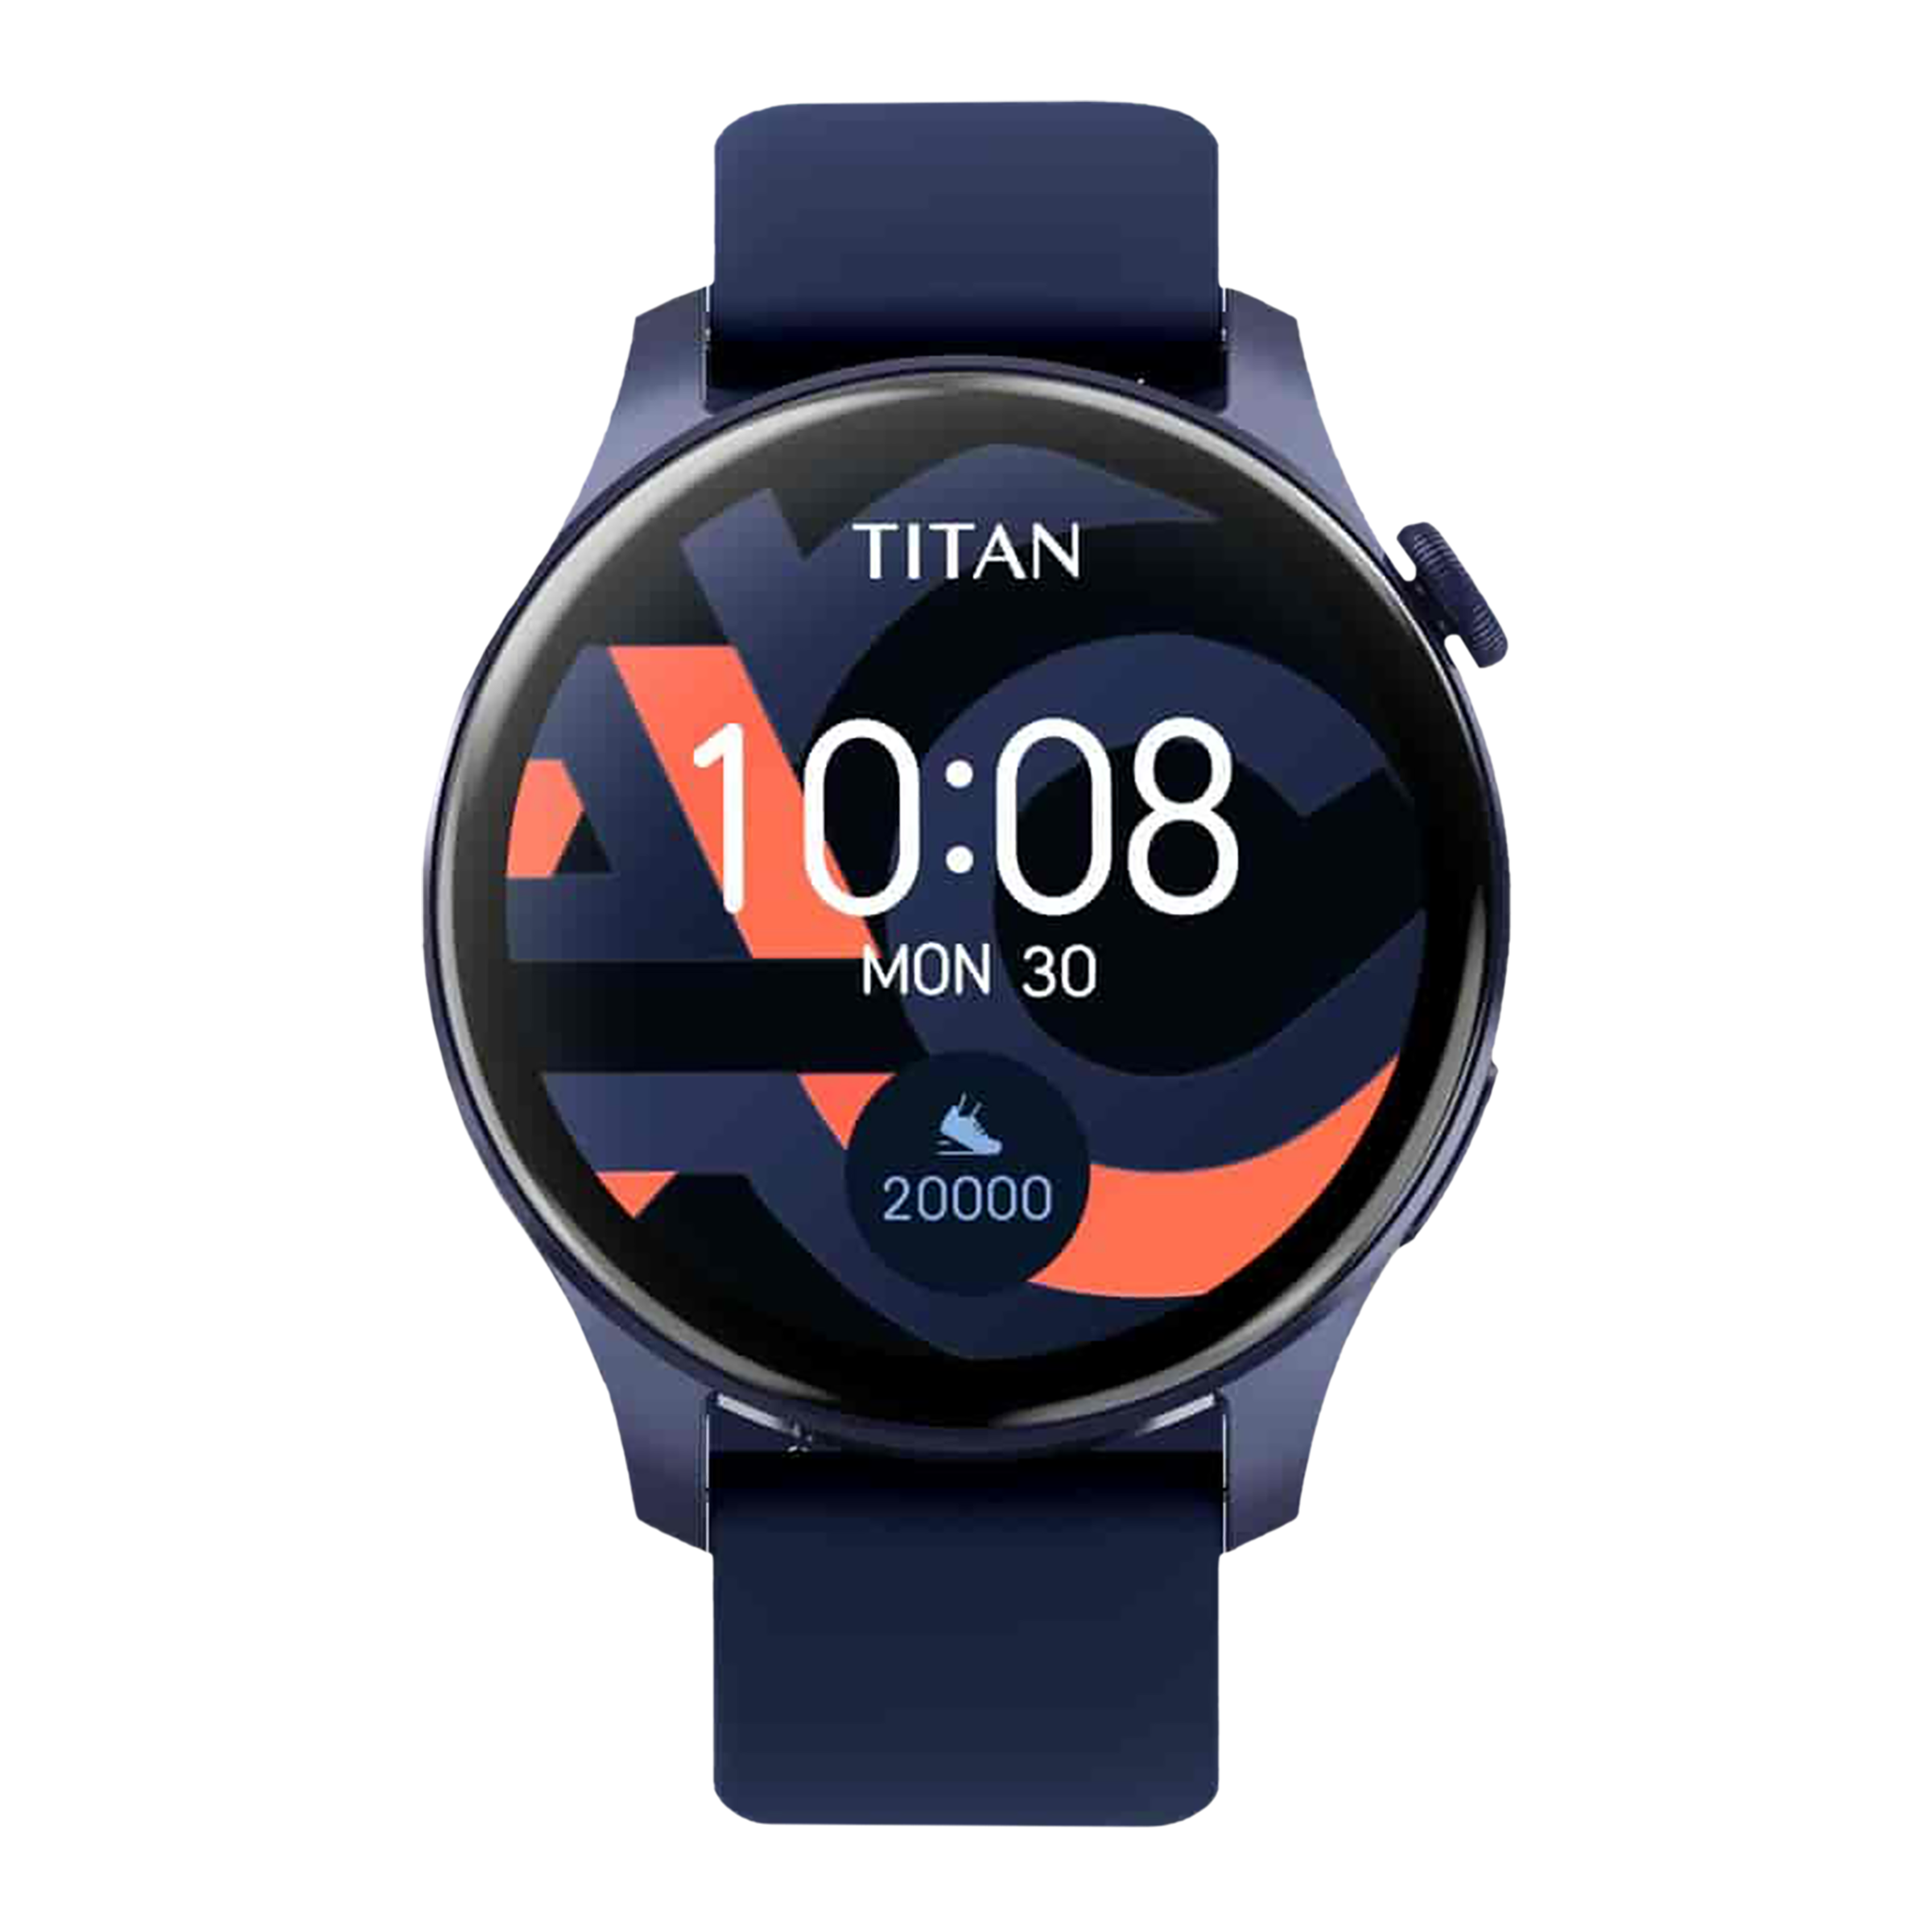 TITAN Talk Smartwatch with Bluetooth Calling (35.3mm AMOLED Display, IP68 Water Resistant, Blue Strap)